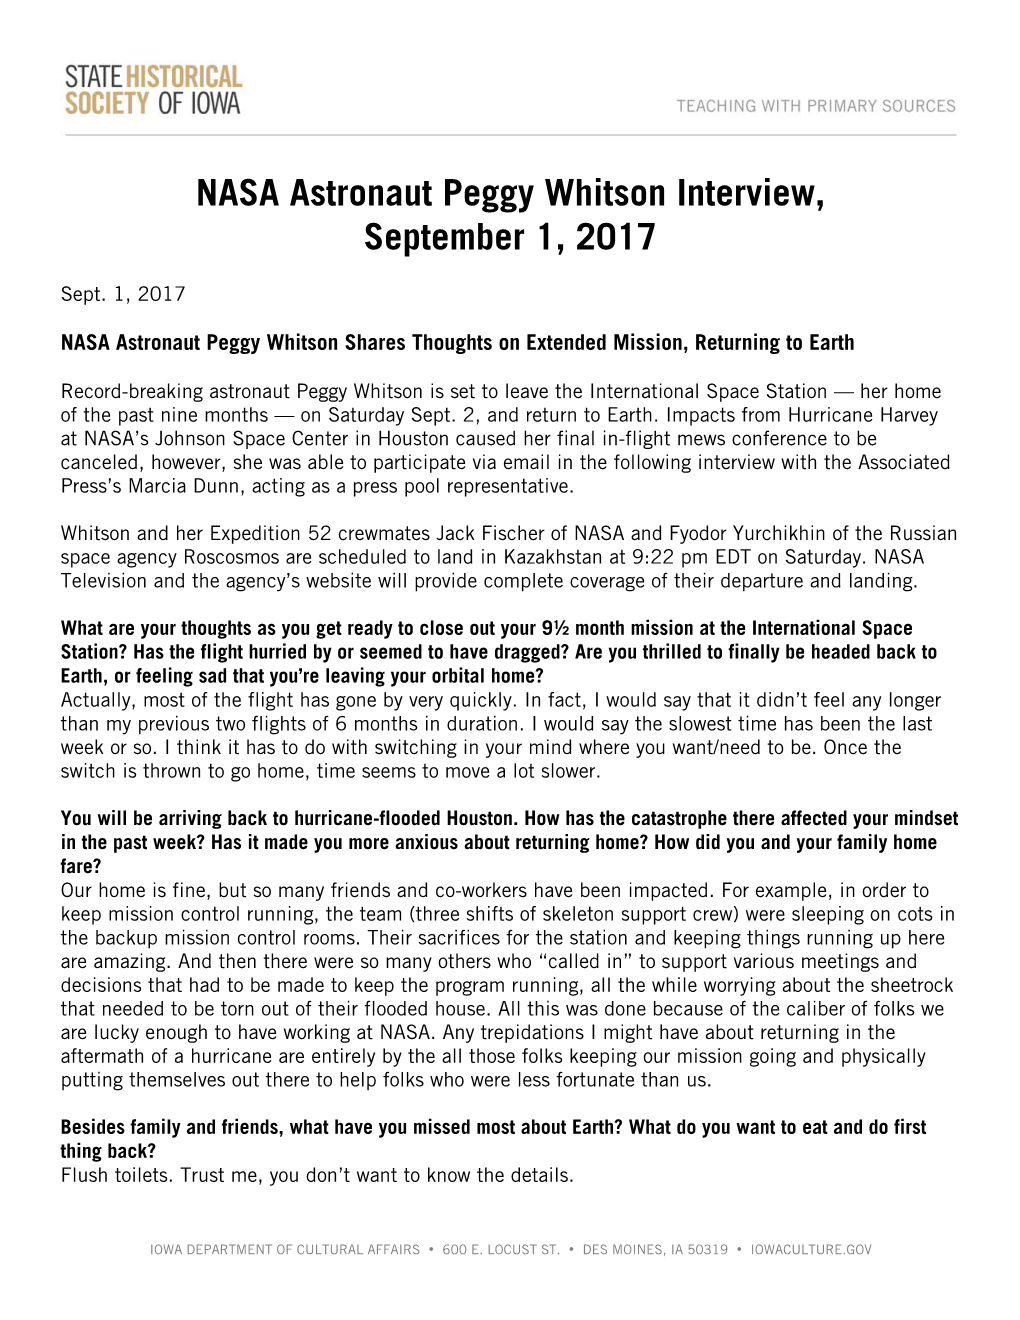 Full Transcript of Peggy Whitson's Interview